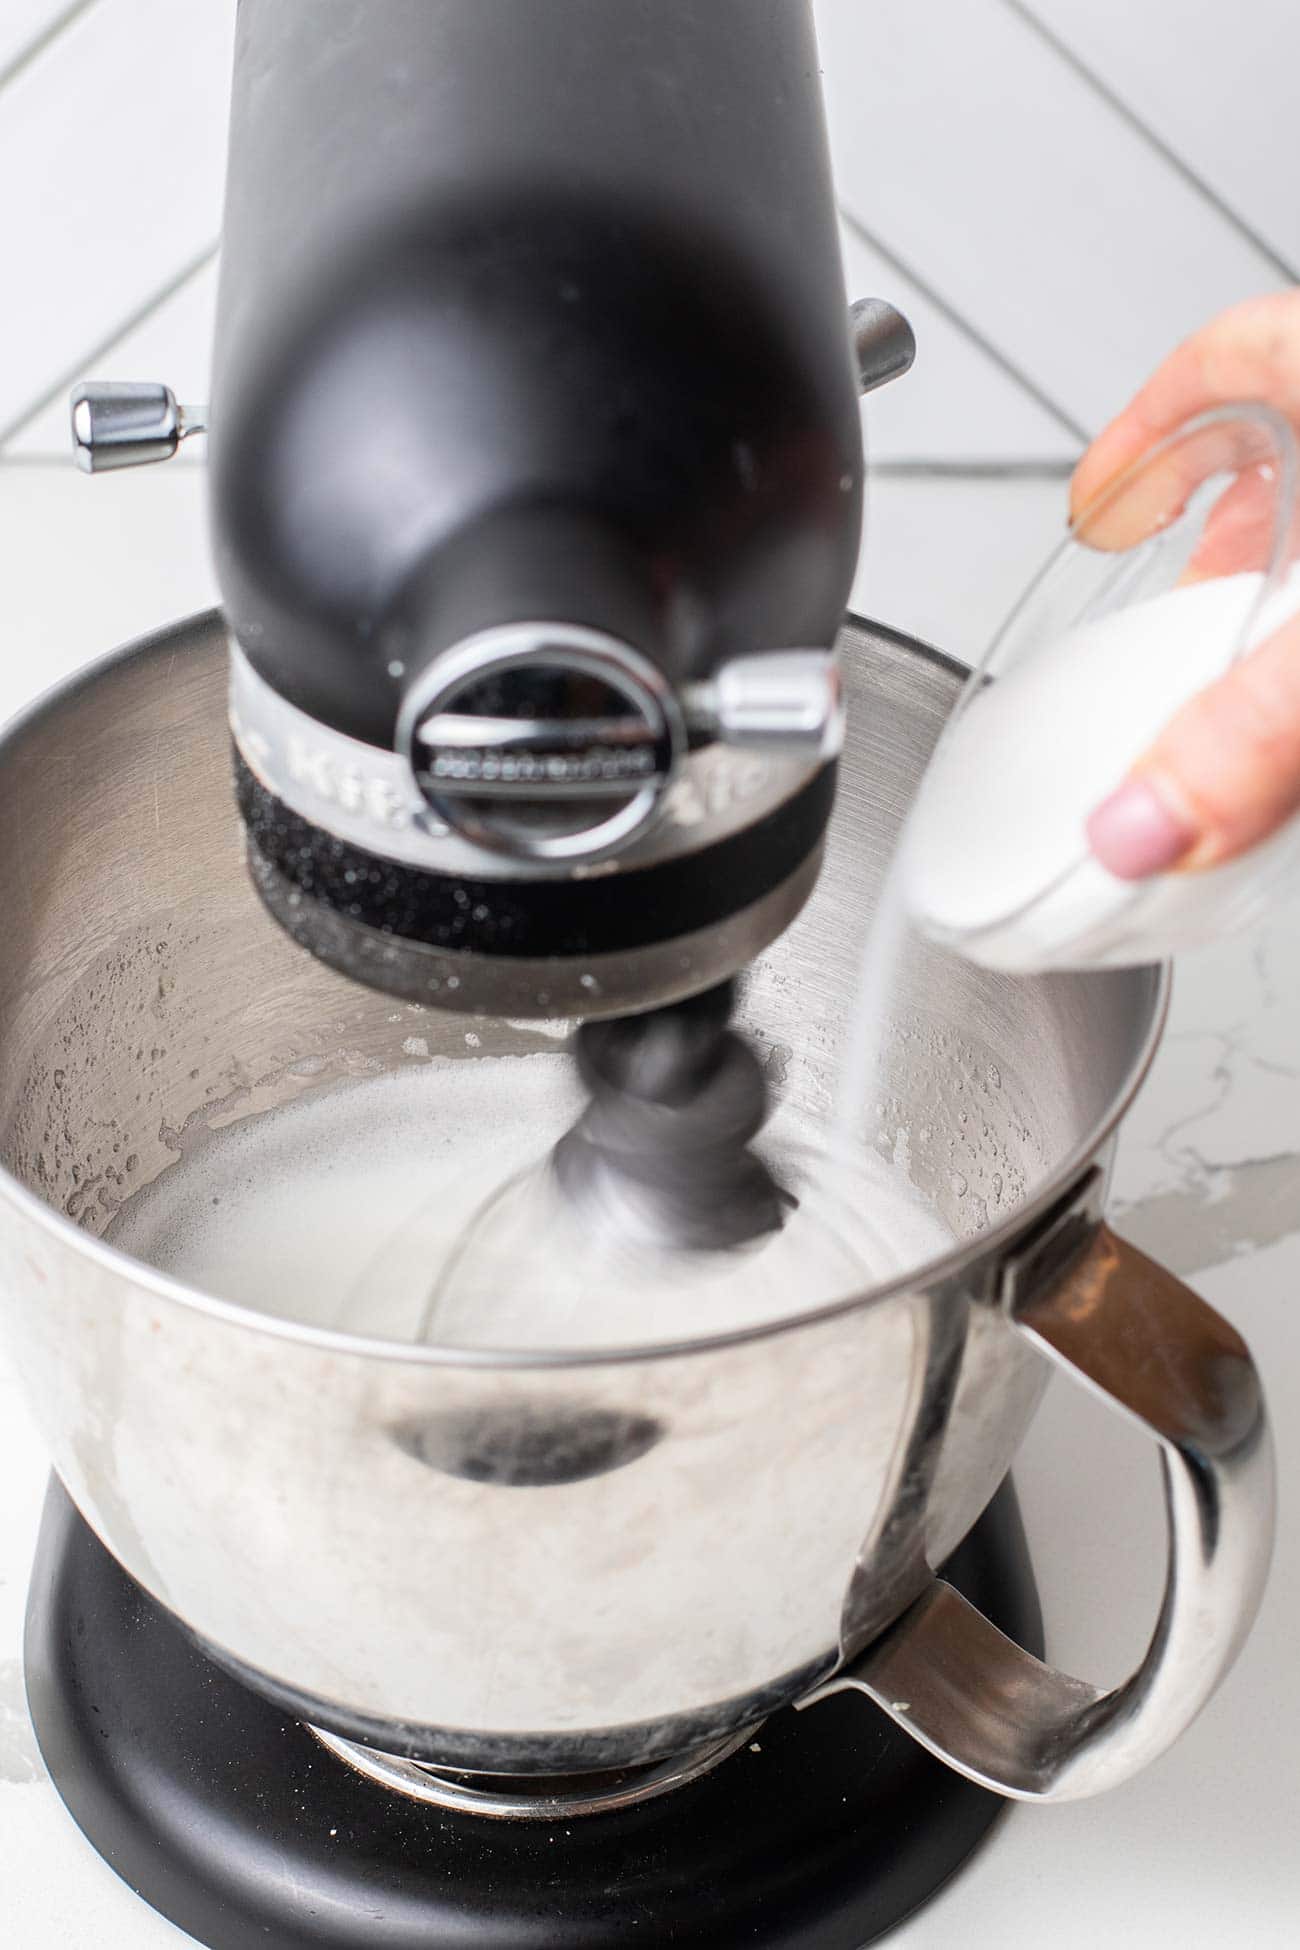 A mixer running with a dish of sugar slowly being poured in.